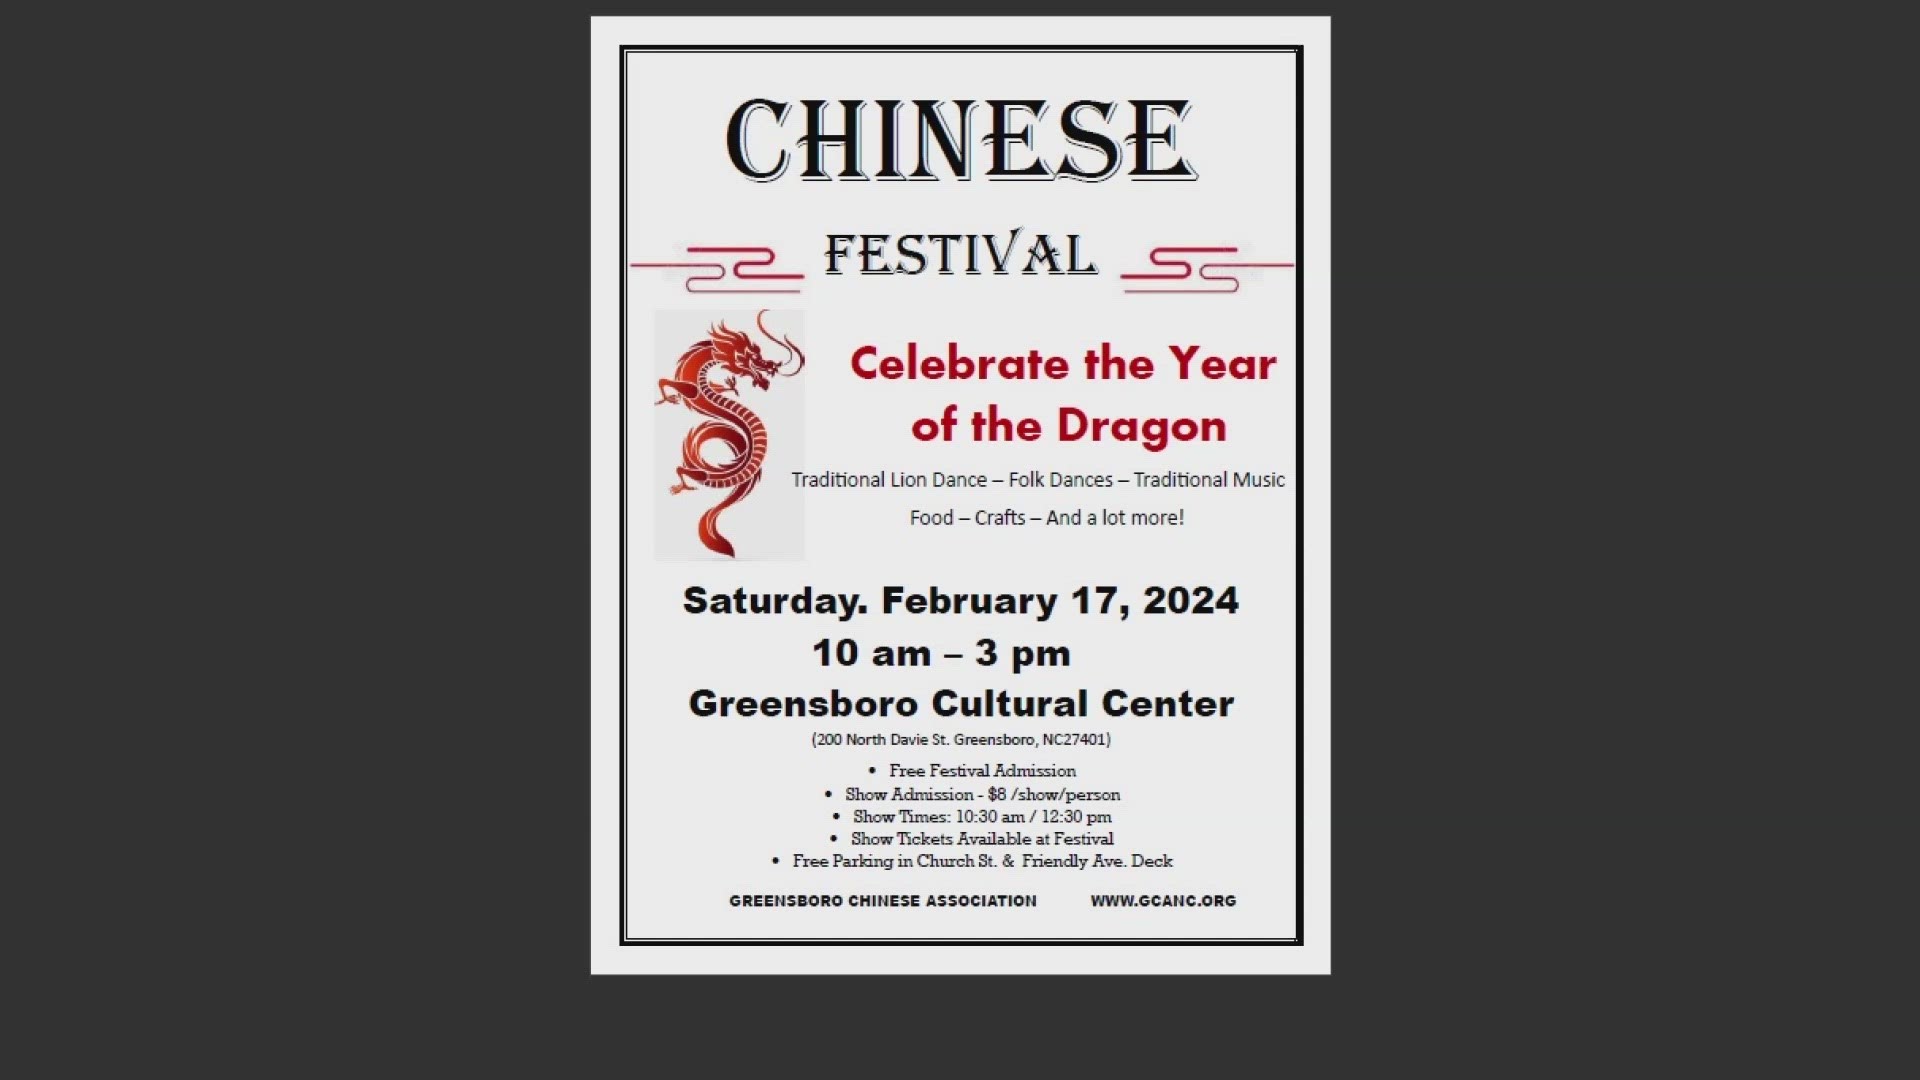 For the first time since the pandemic, the Greensboro Chinese Association is celebrating the Lunar New Year!